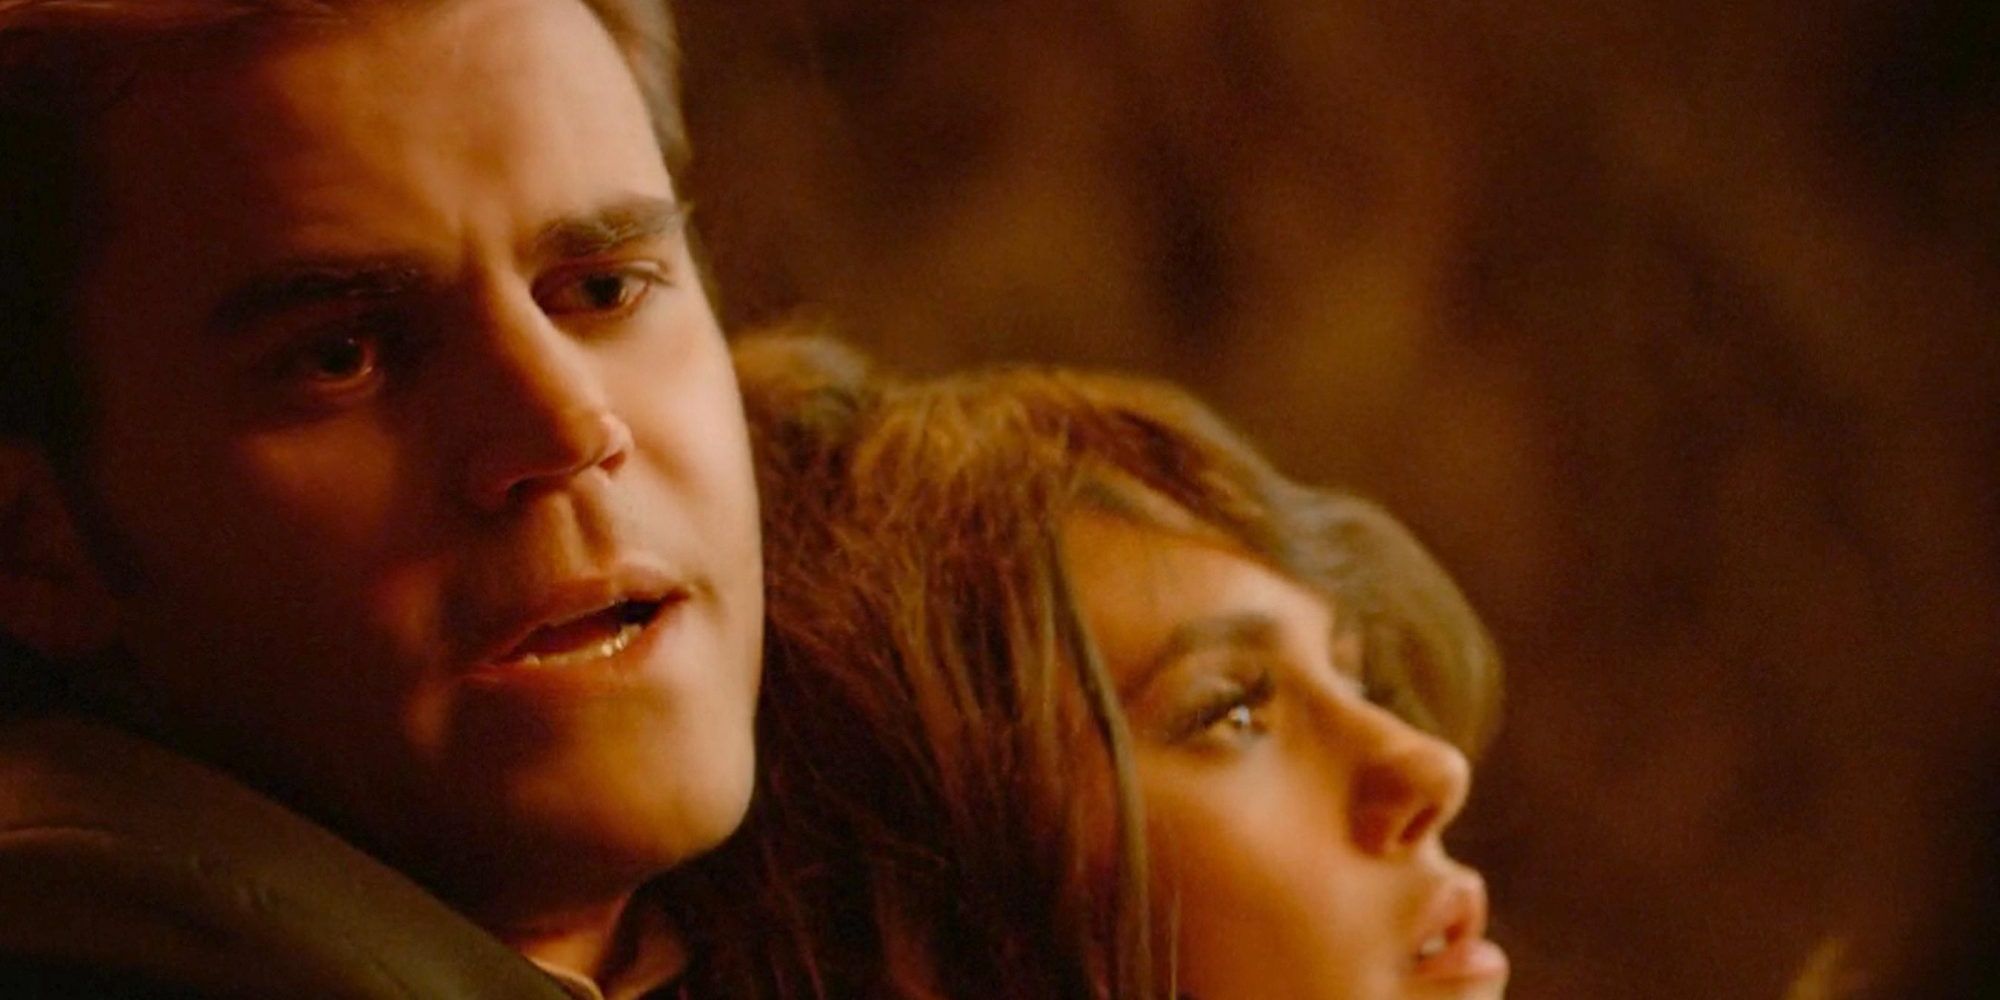 The Vampire Diaries 10 Moments That Left Us Totally Stunned